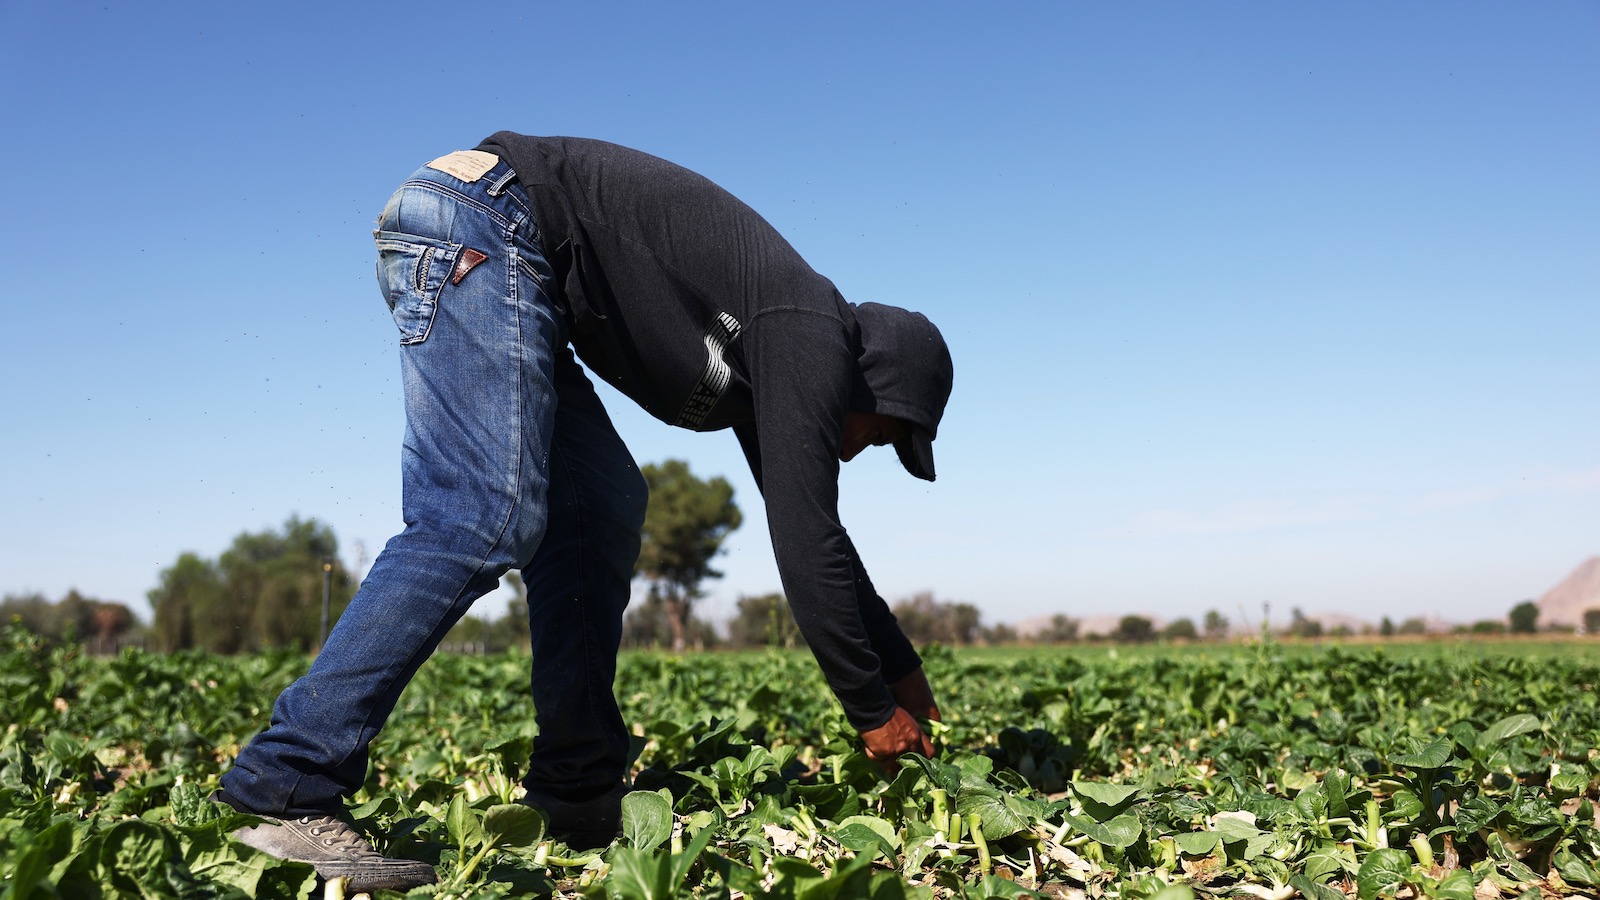 A farm worker wears protective layers while harvesting produce in the summer heat